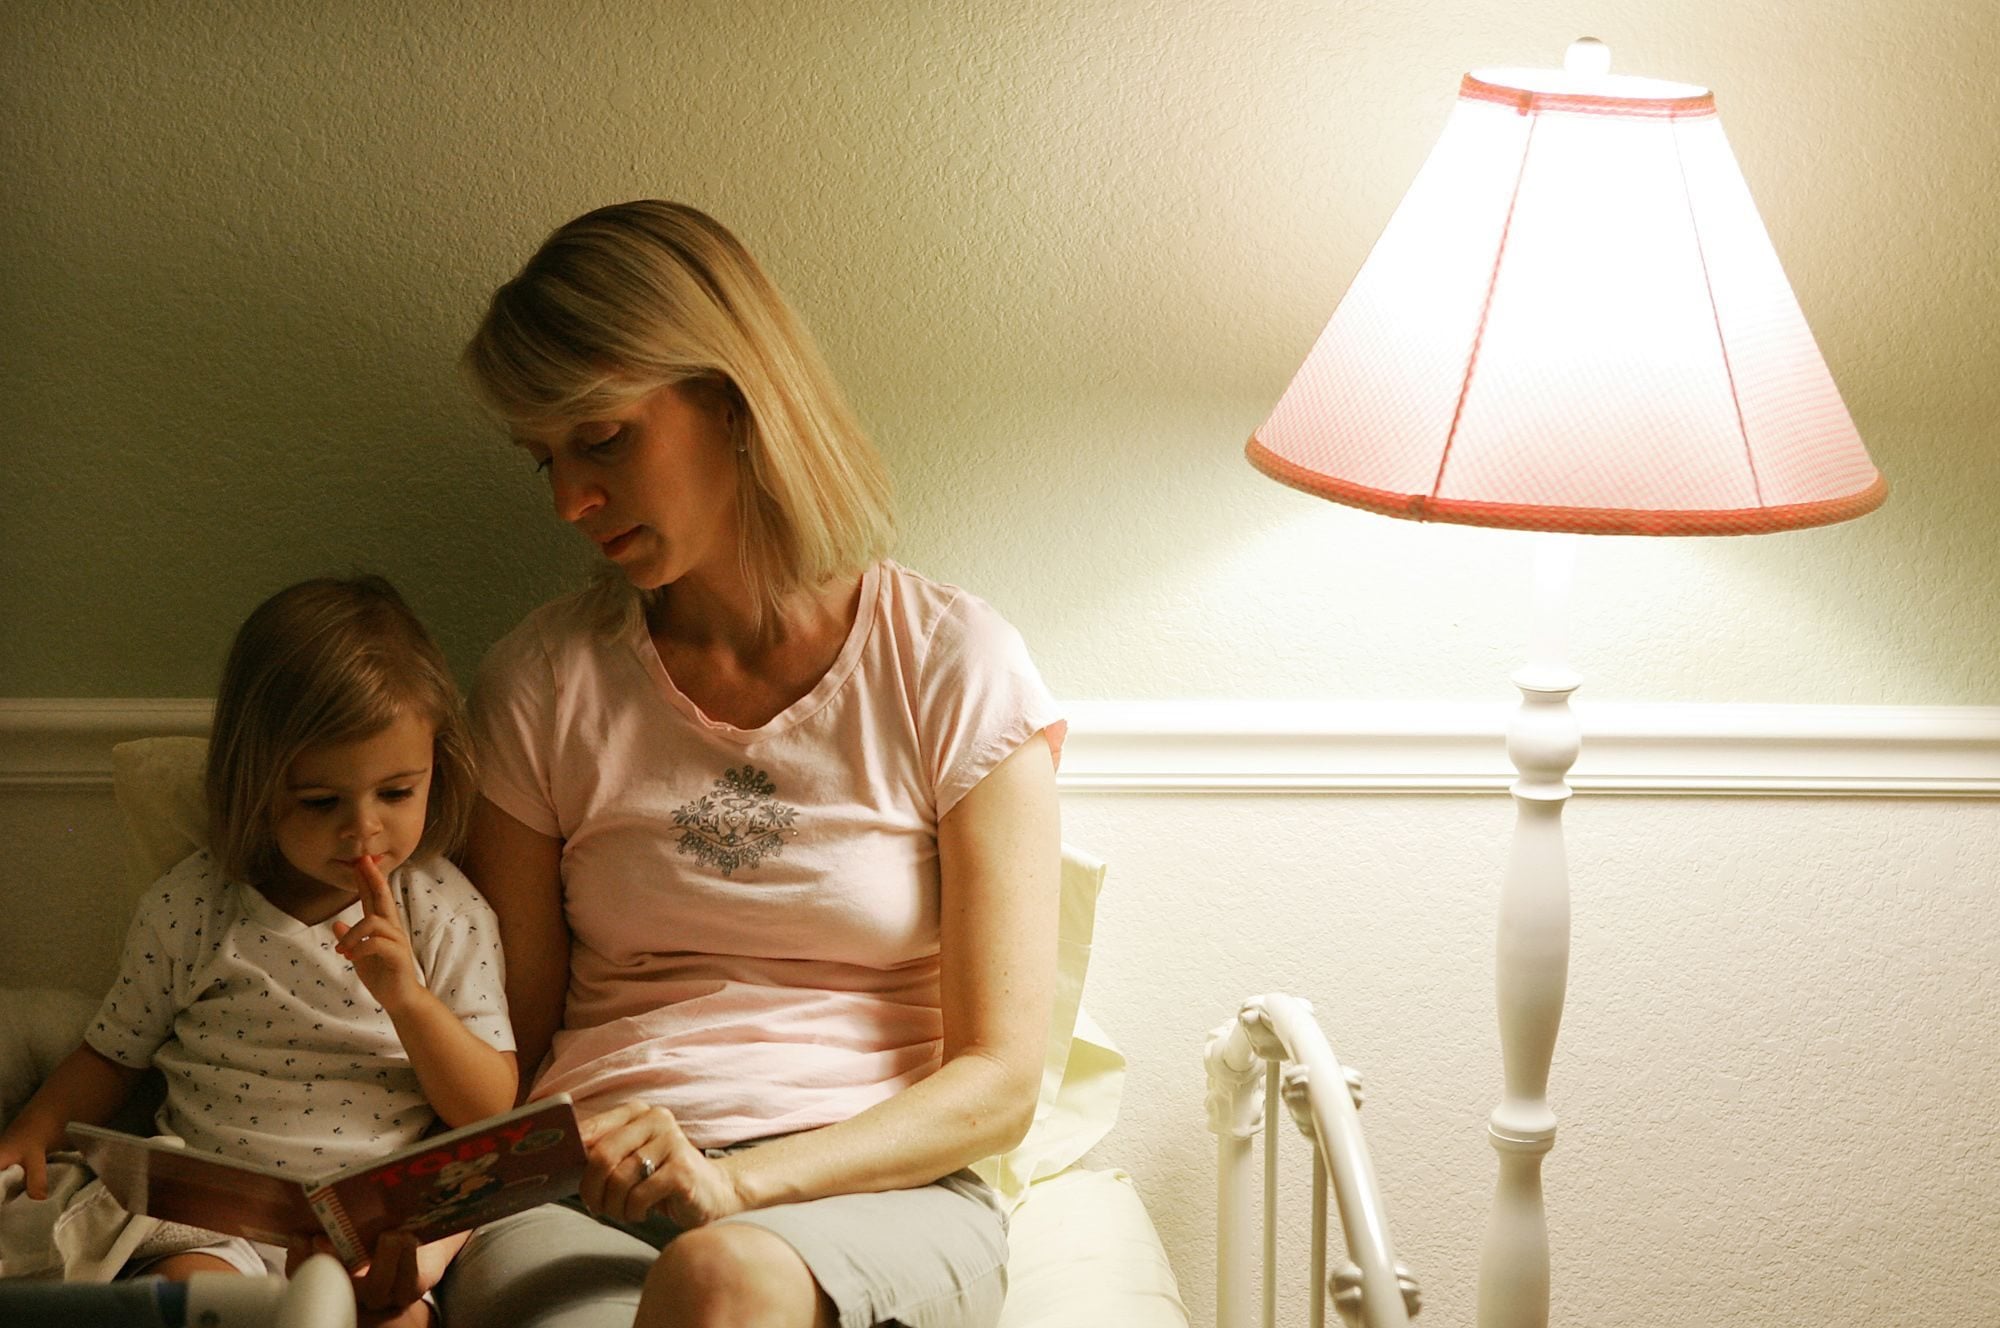 Allysa Adams, right, reads a bedtime story to her younger daughter, Andie Adams Urbinato, 2 1/2, at their home in Phoenix, Ariz. in this 2007 file photo.